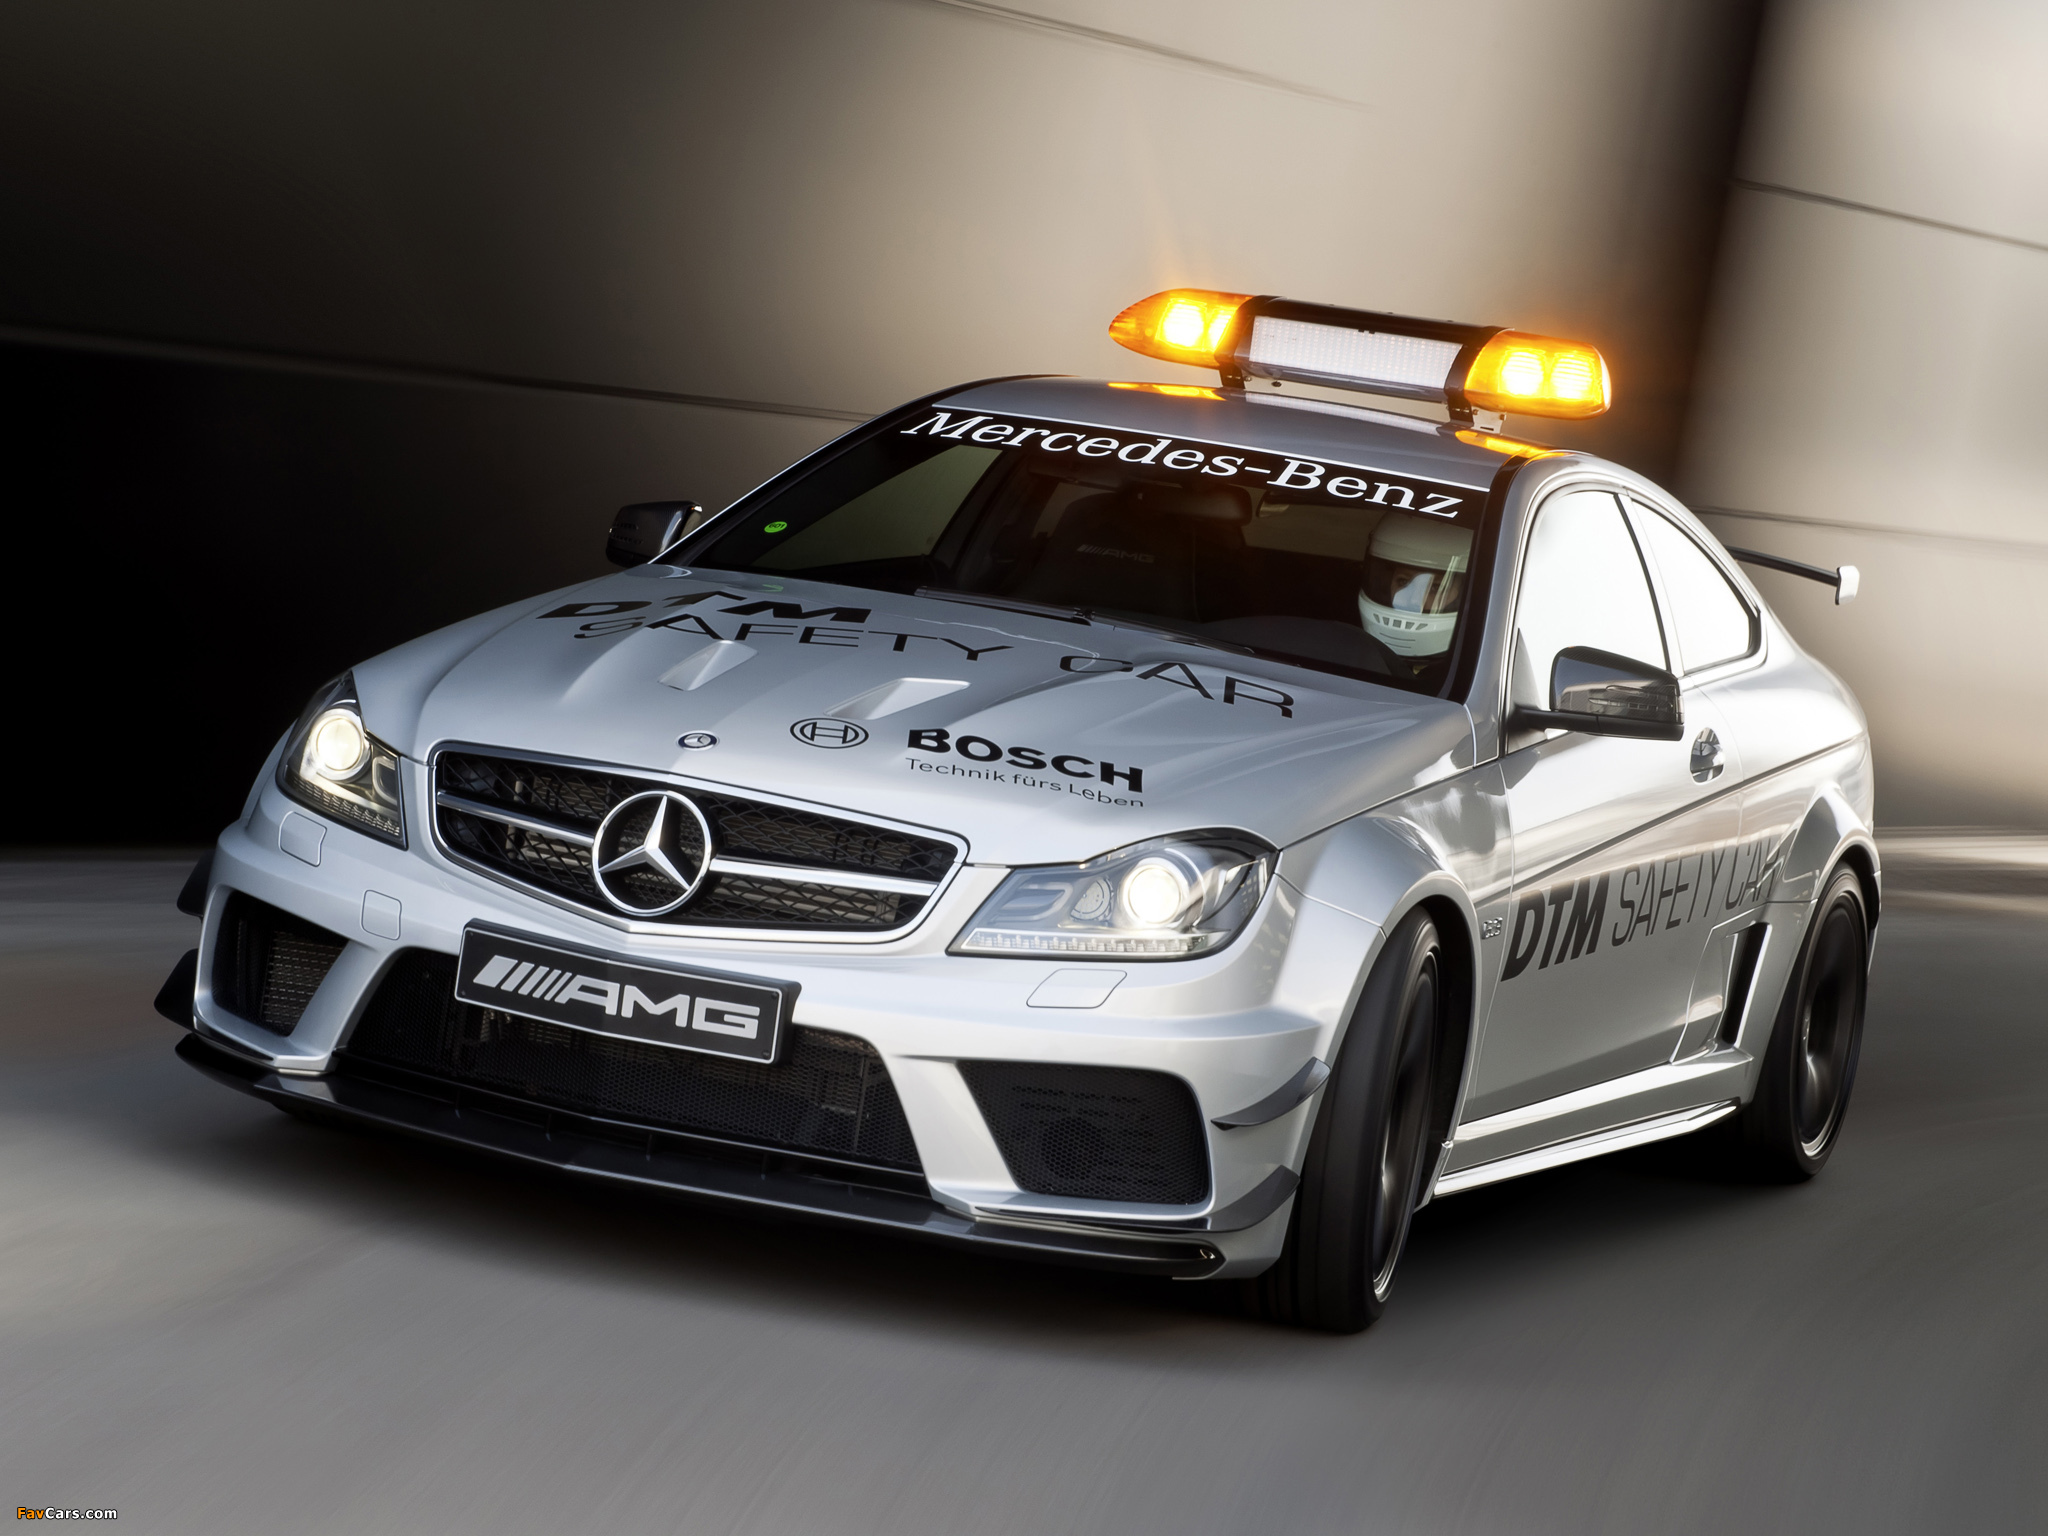 Mercedes-Benz C 63 AMG Black Series Coupe DTM Safety Car (C204) 2012 pictures (2048 x 1536)